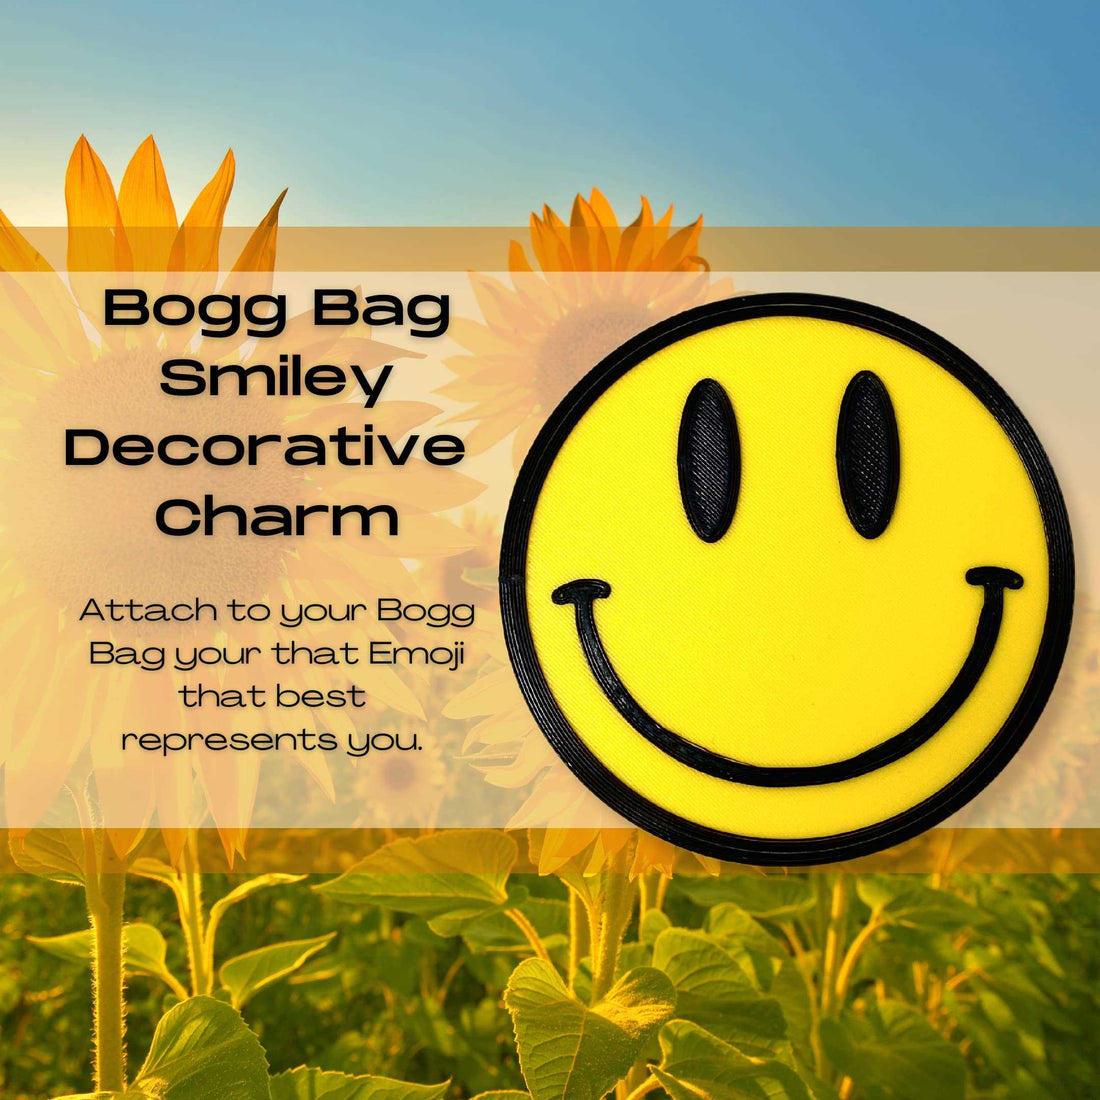 FRESHe BOGLETS - Smiley Emoji Charm - Decorative Charms - Compatible with Bogg Bags, Simply Southern and other Tote Bags. Smiley